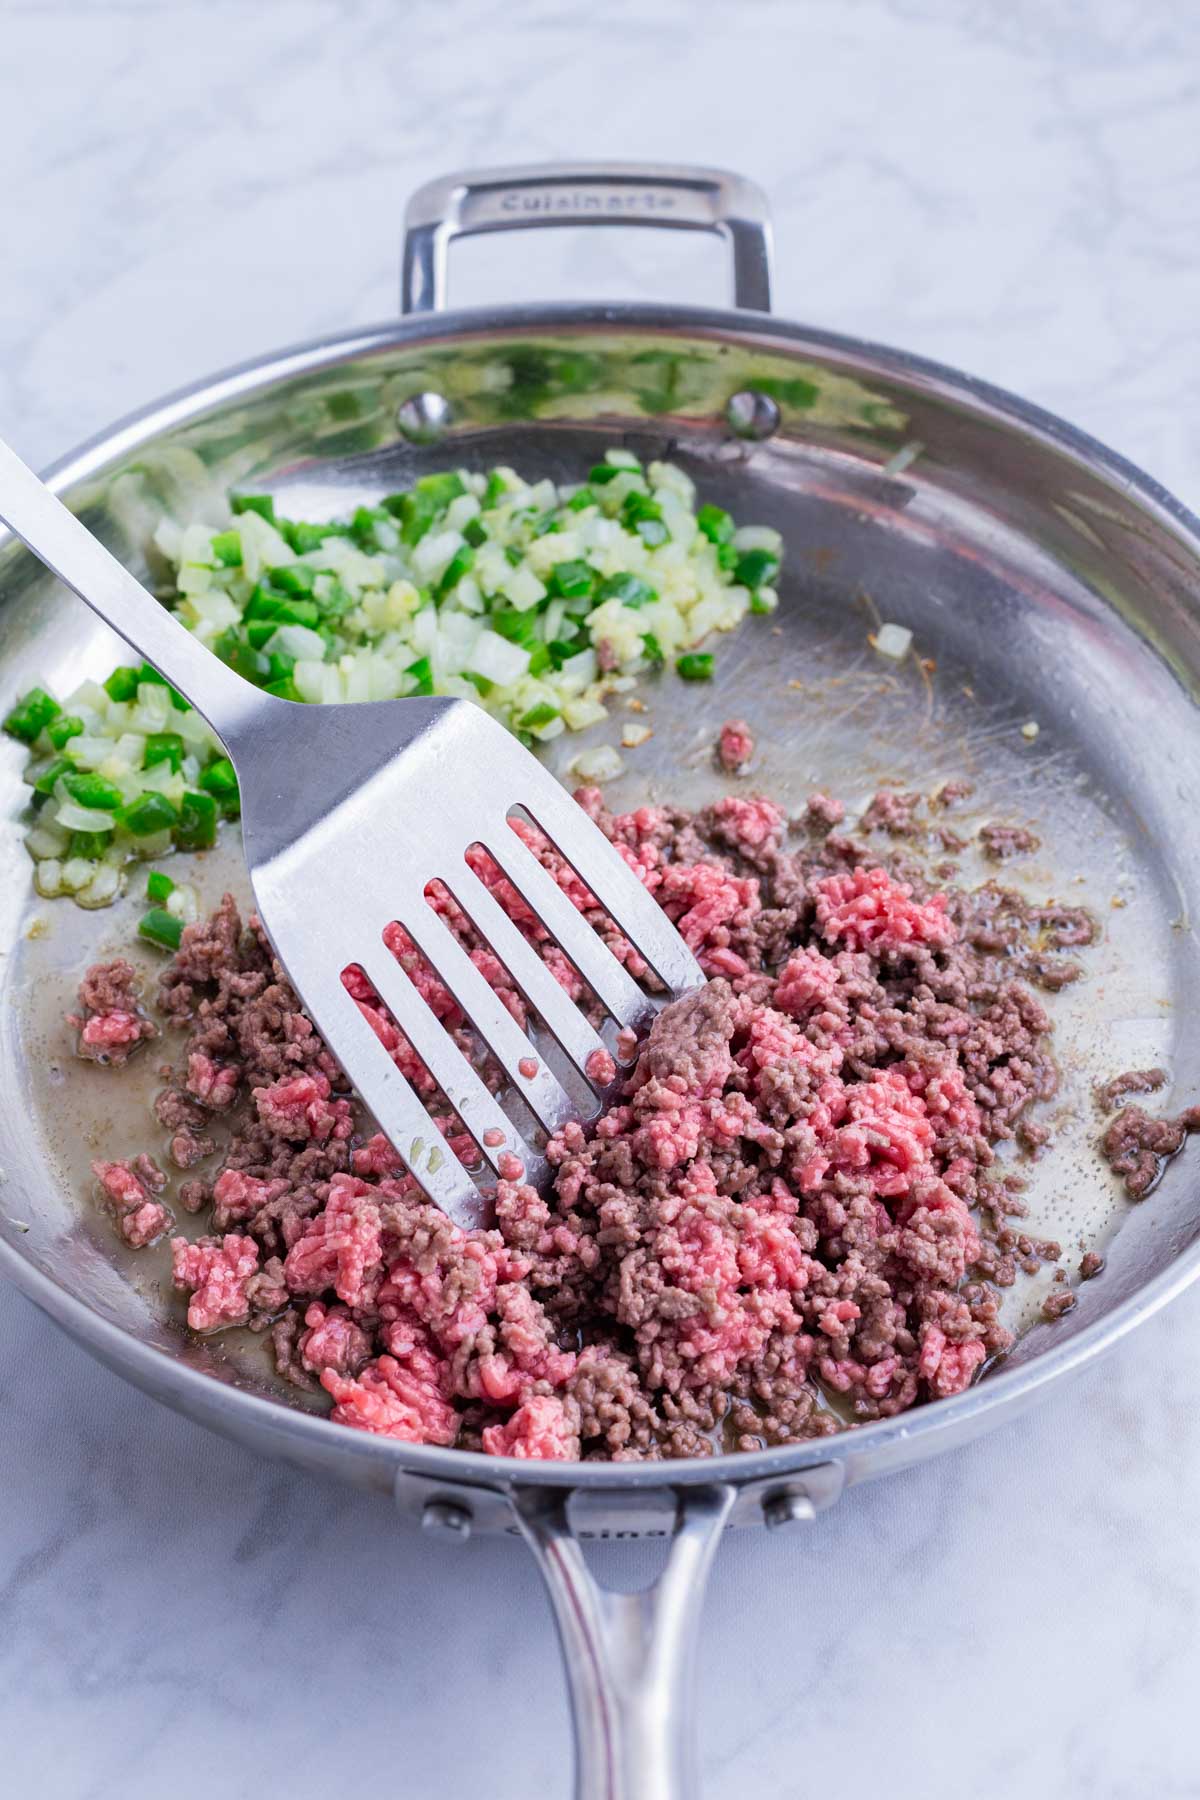 Ground beef is added to the skillet.